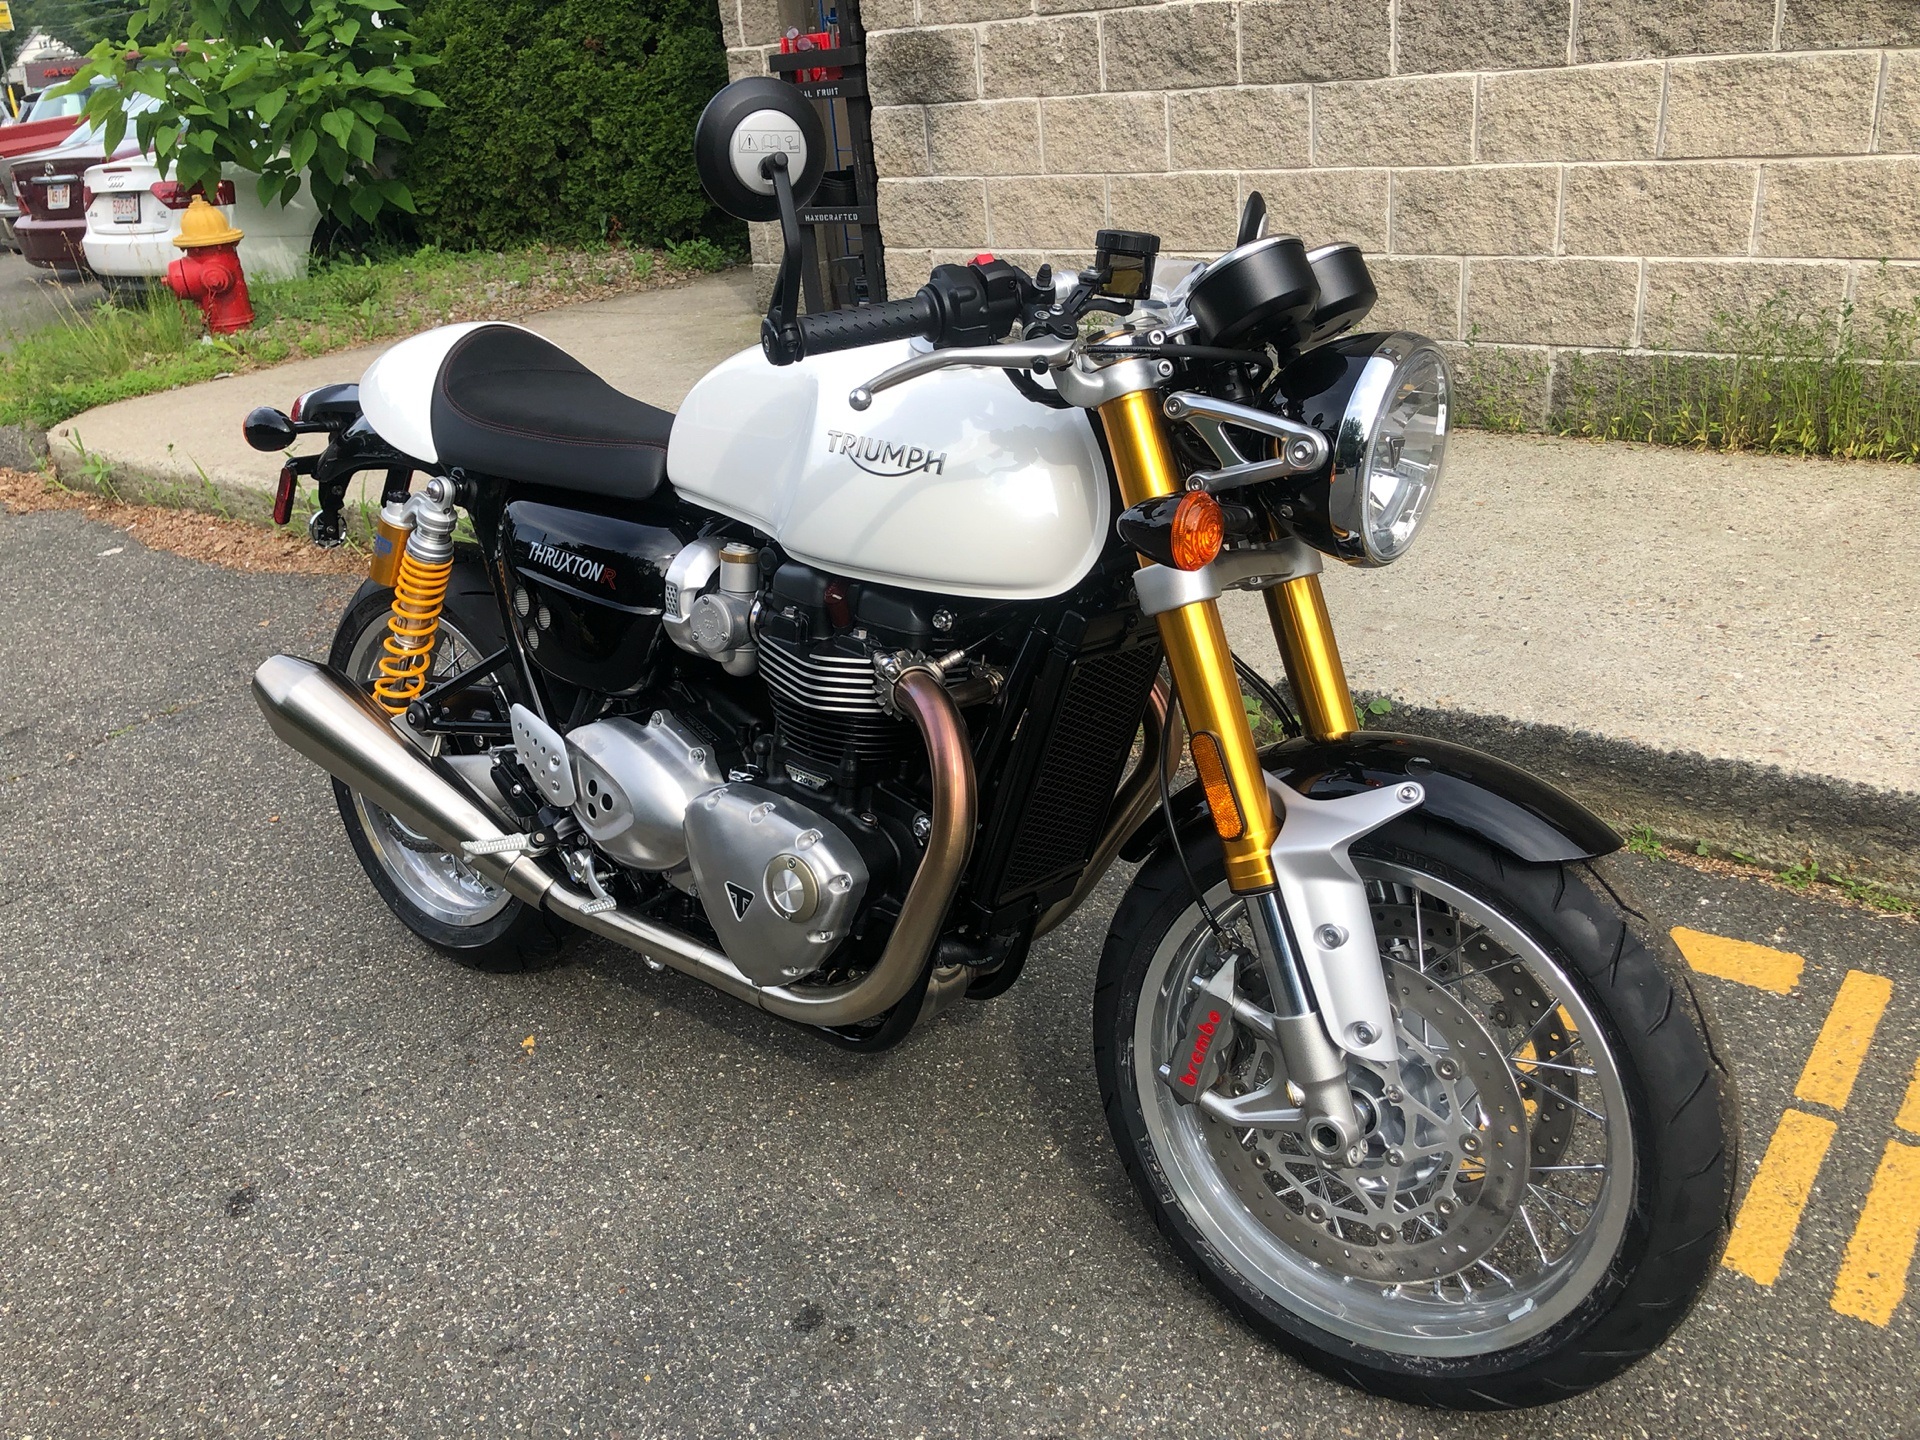 New 2019 Triumph Thruxton 1200 R Motorcycles In Enfield Ct.